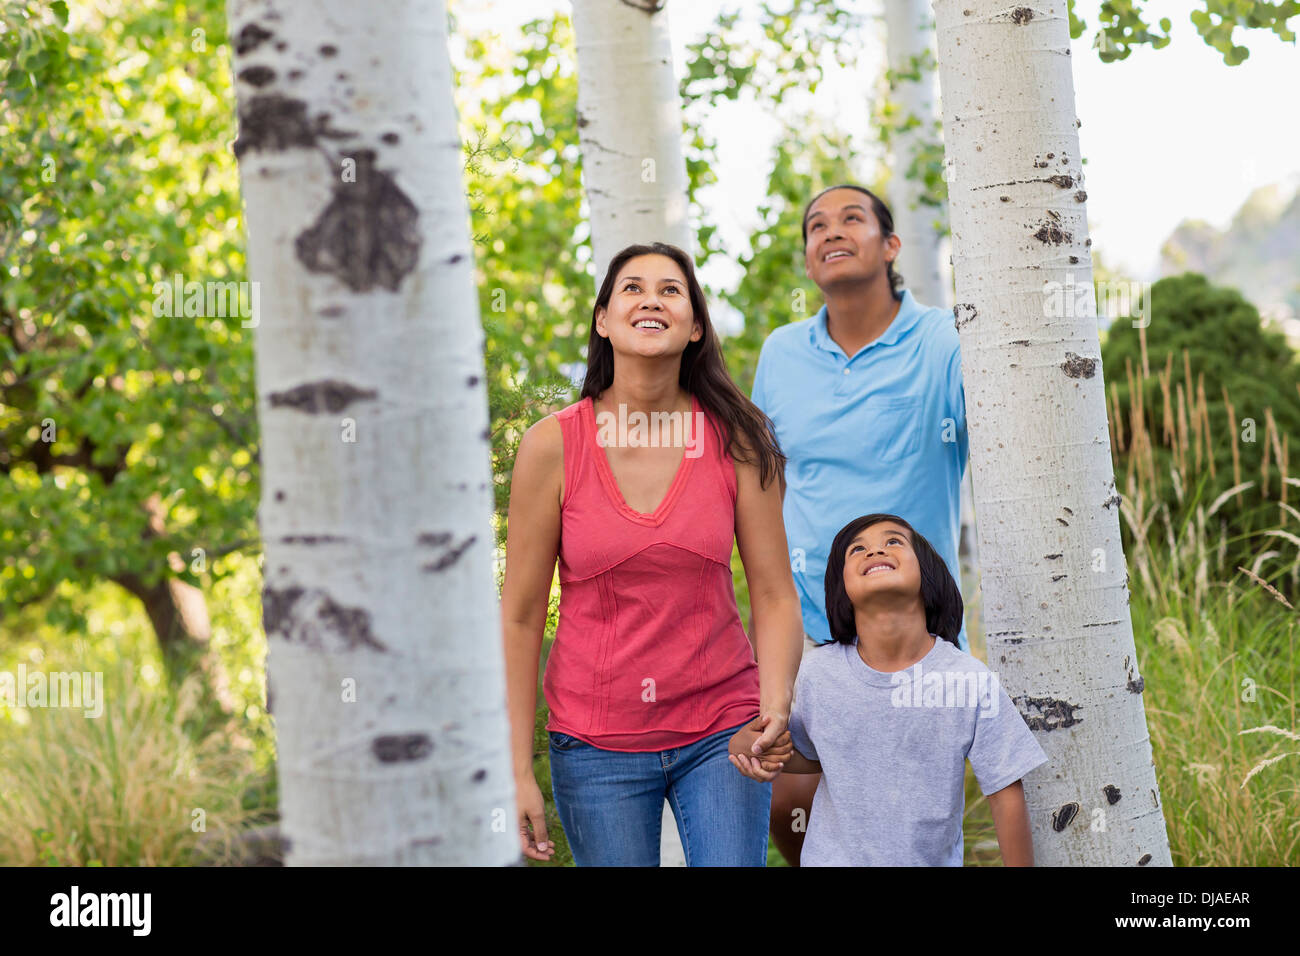 Family walking together outdoors Stock Photo